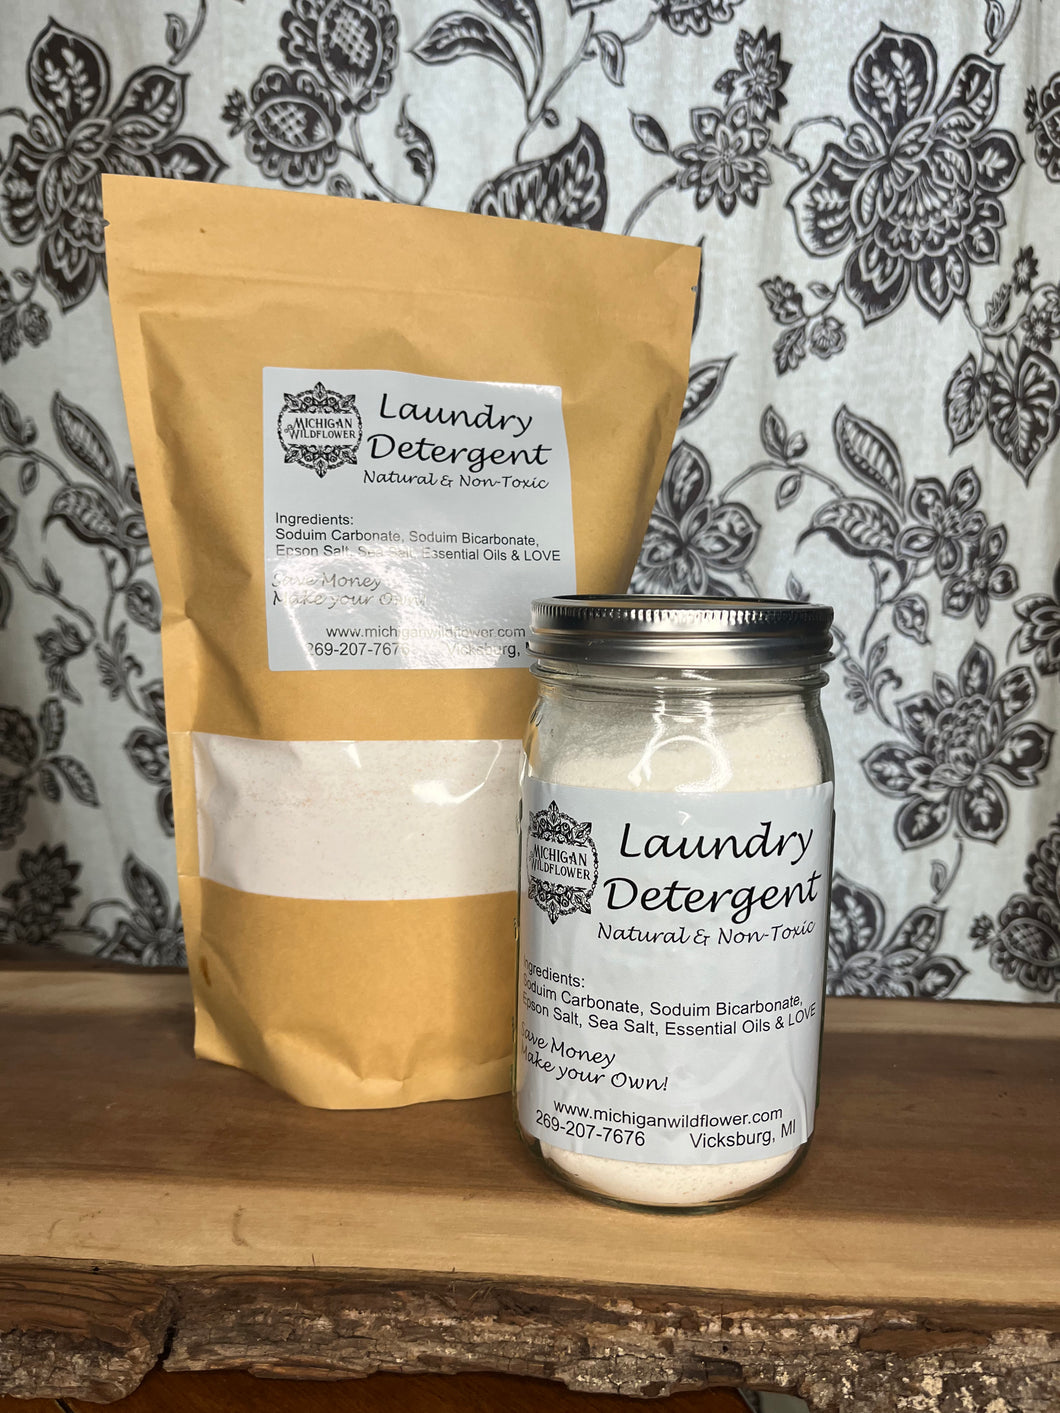 Laundry Detergent Natural and Non-toxic